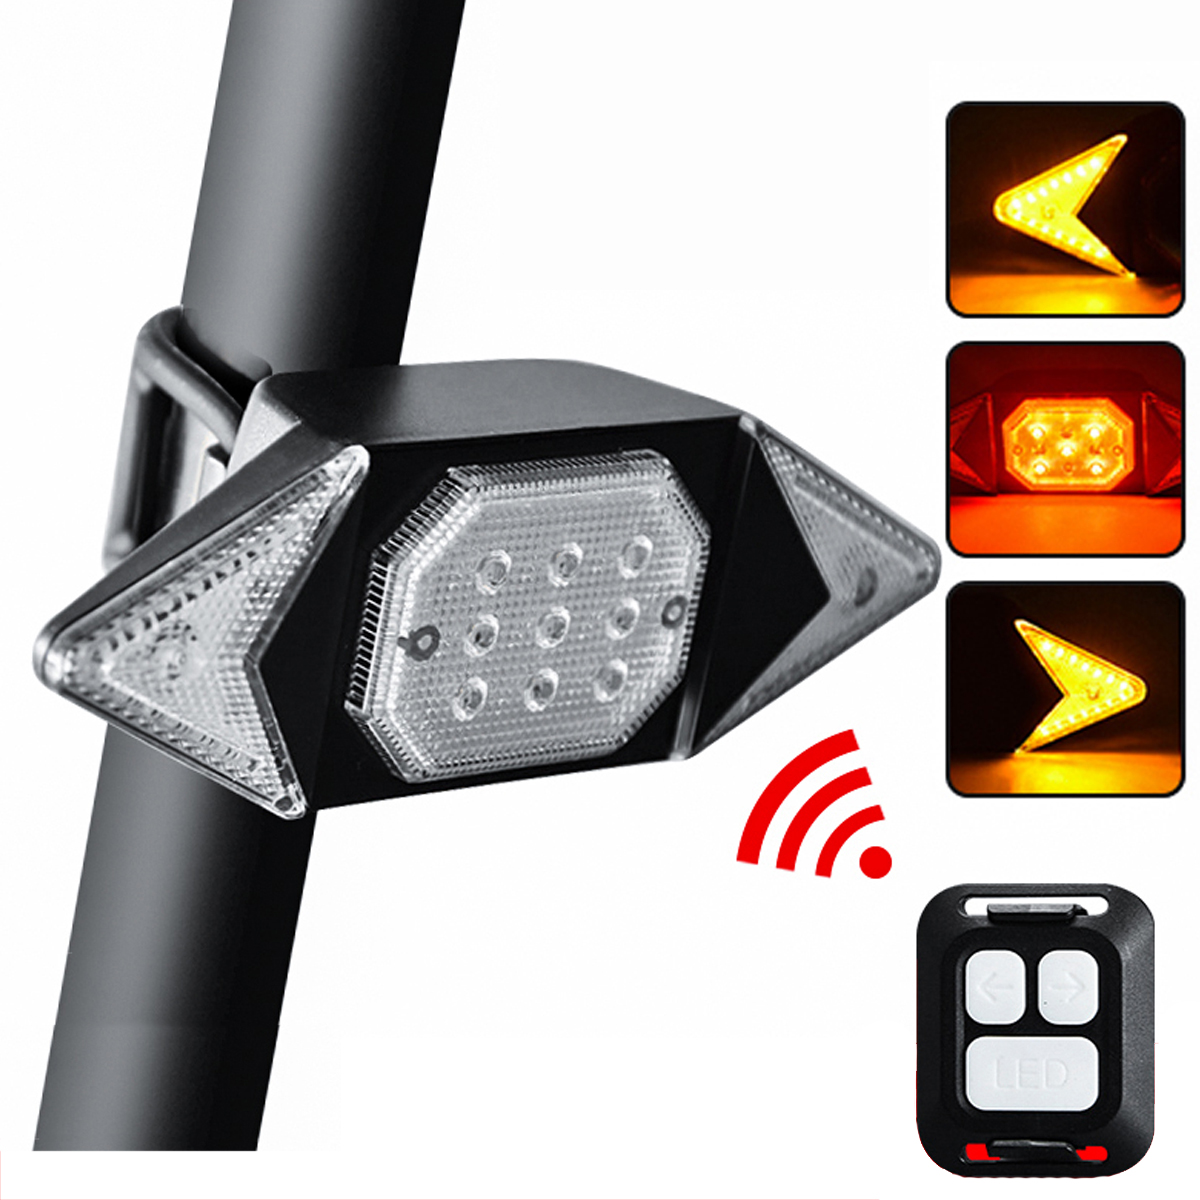 Signal Light Bike Bicycle Tail Light Remote Control Turn USB Chargeable 500Mah